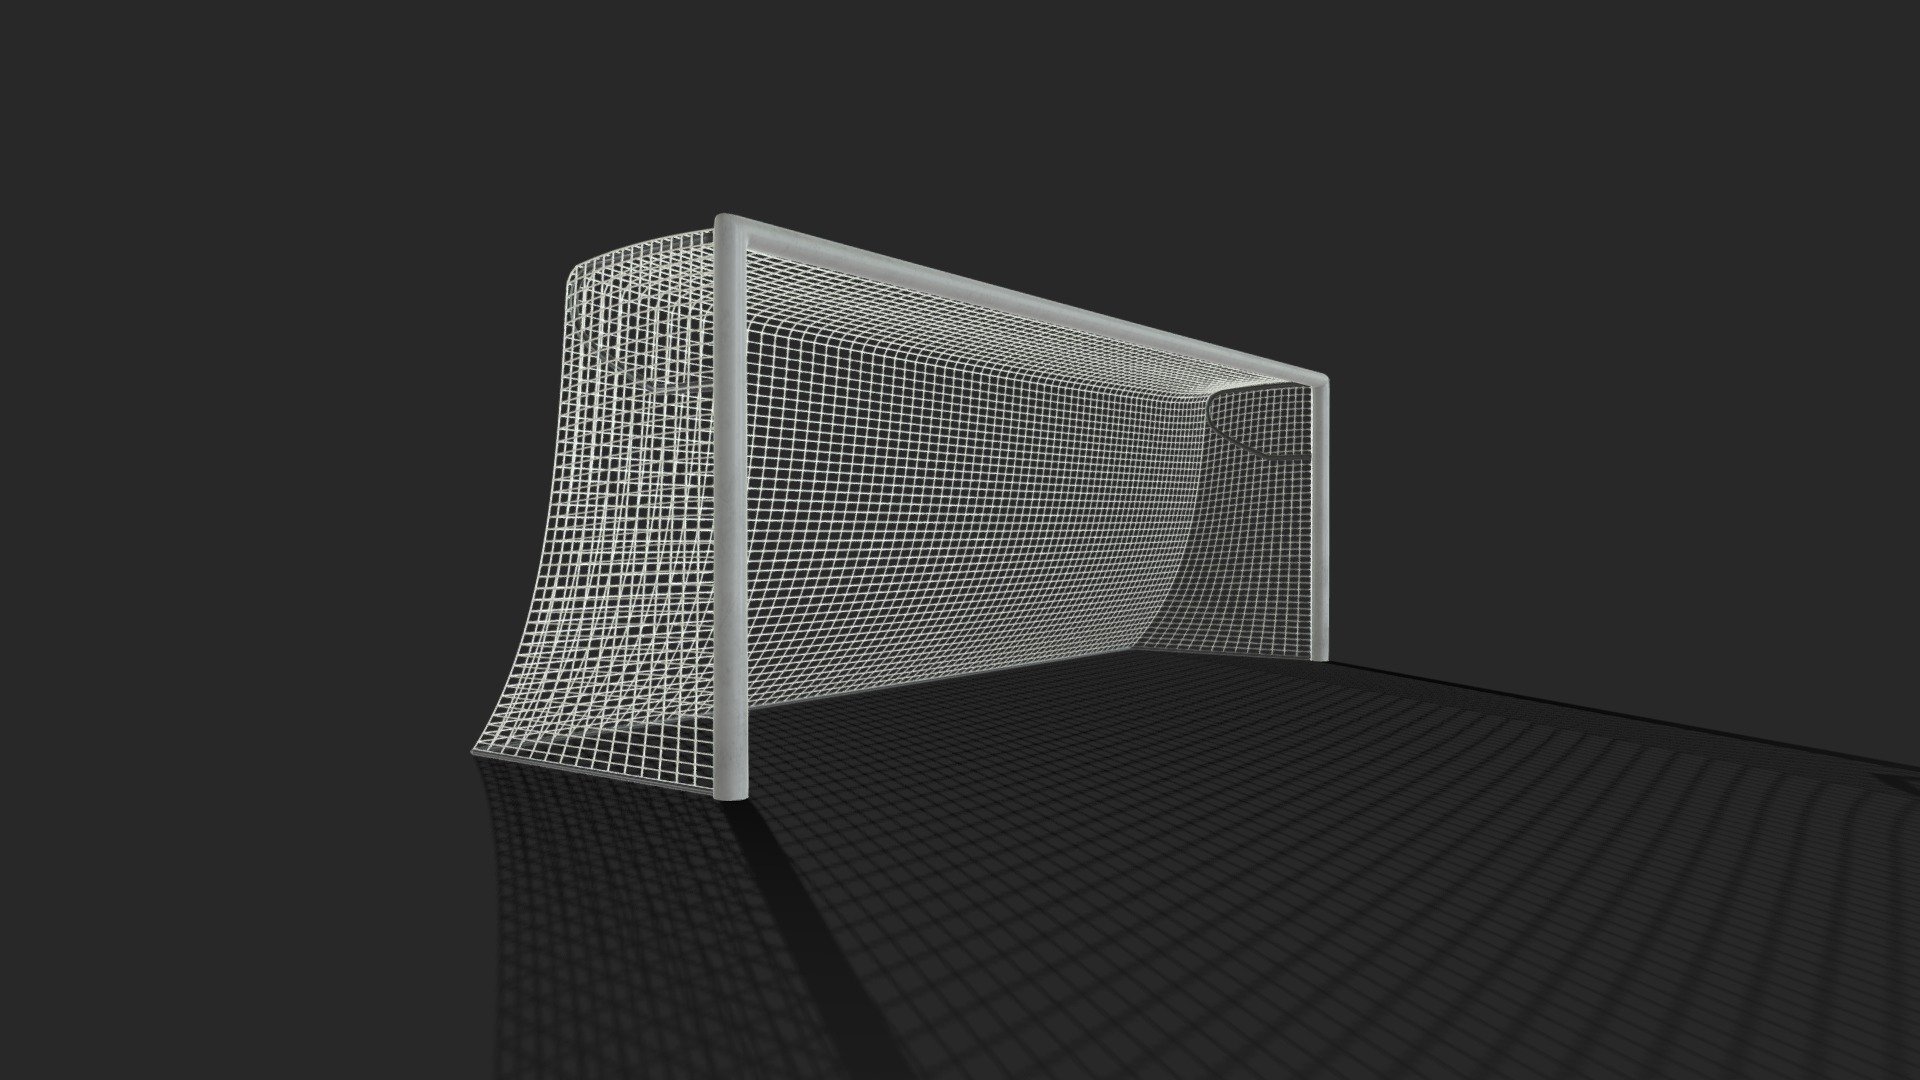 Classic Style Football goal with modelled wire.

Use subdivide for higher geometry. 
You can animate the net, it's one object without elements.

Used maps: Base, Reflect, Glossiness, Normal

The bar is Unwrapped, 
Net is 70x70x70 UVW Mapped

FBX File downloadable 3d model